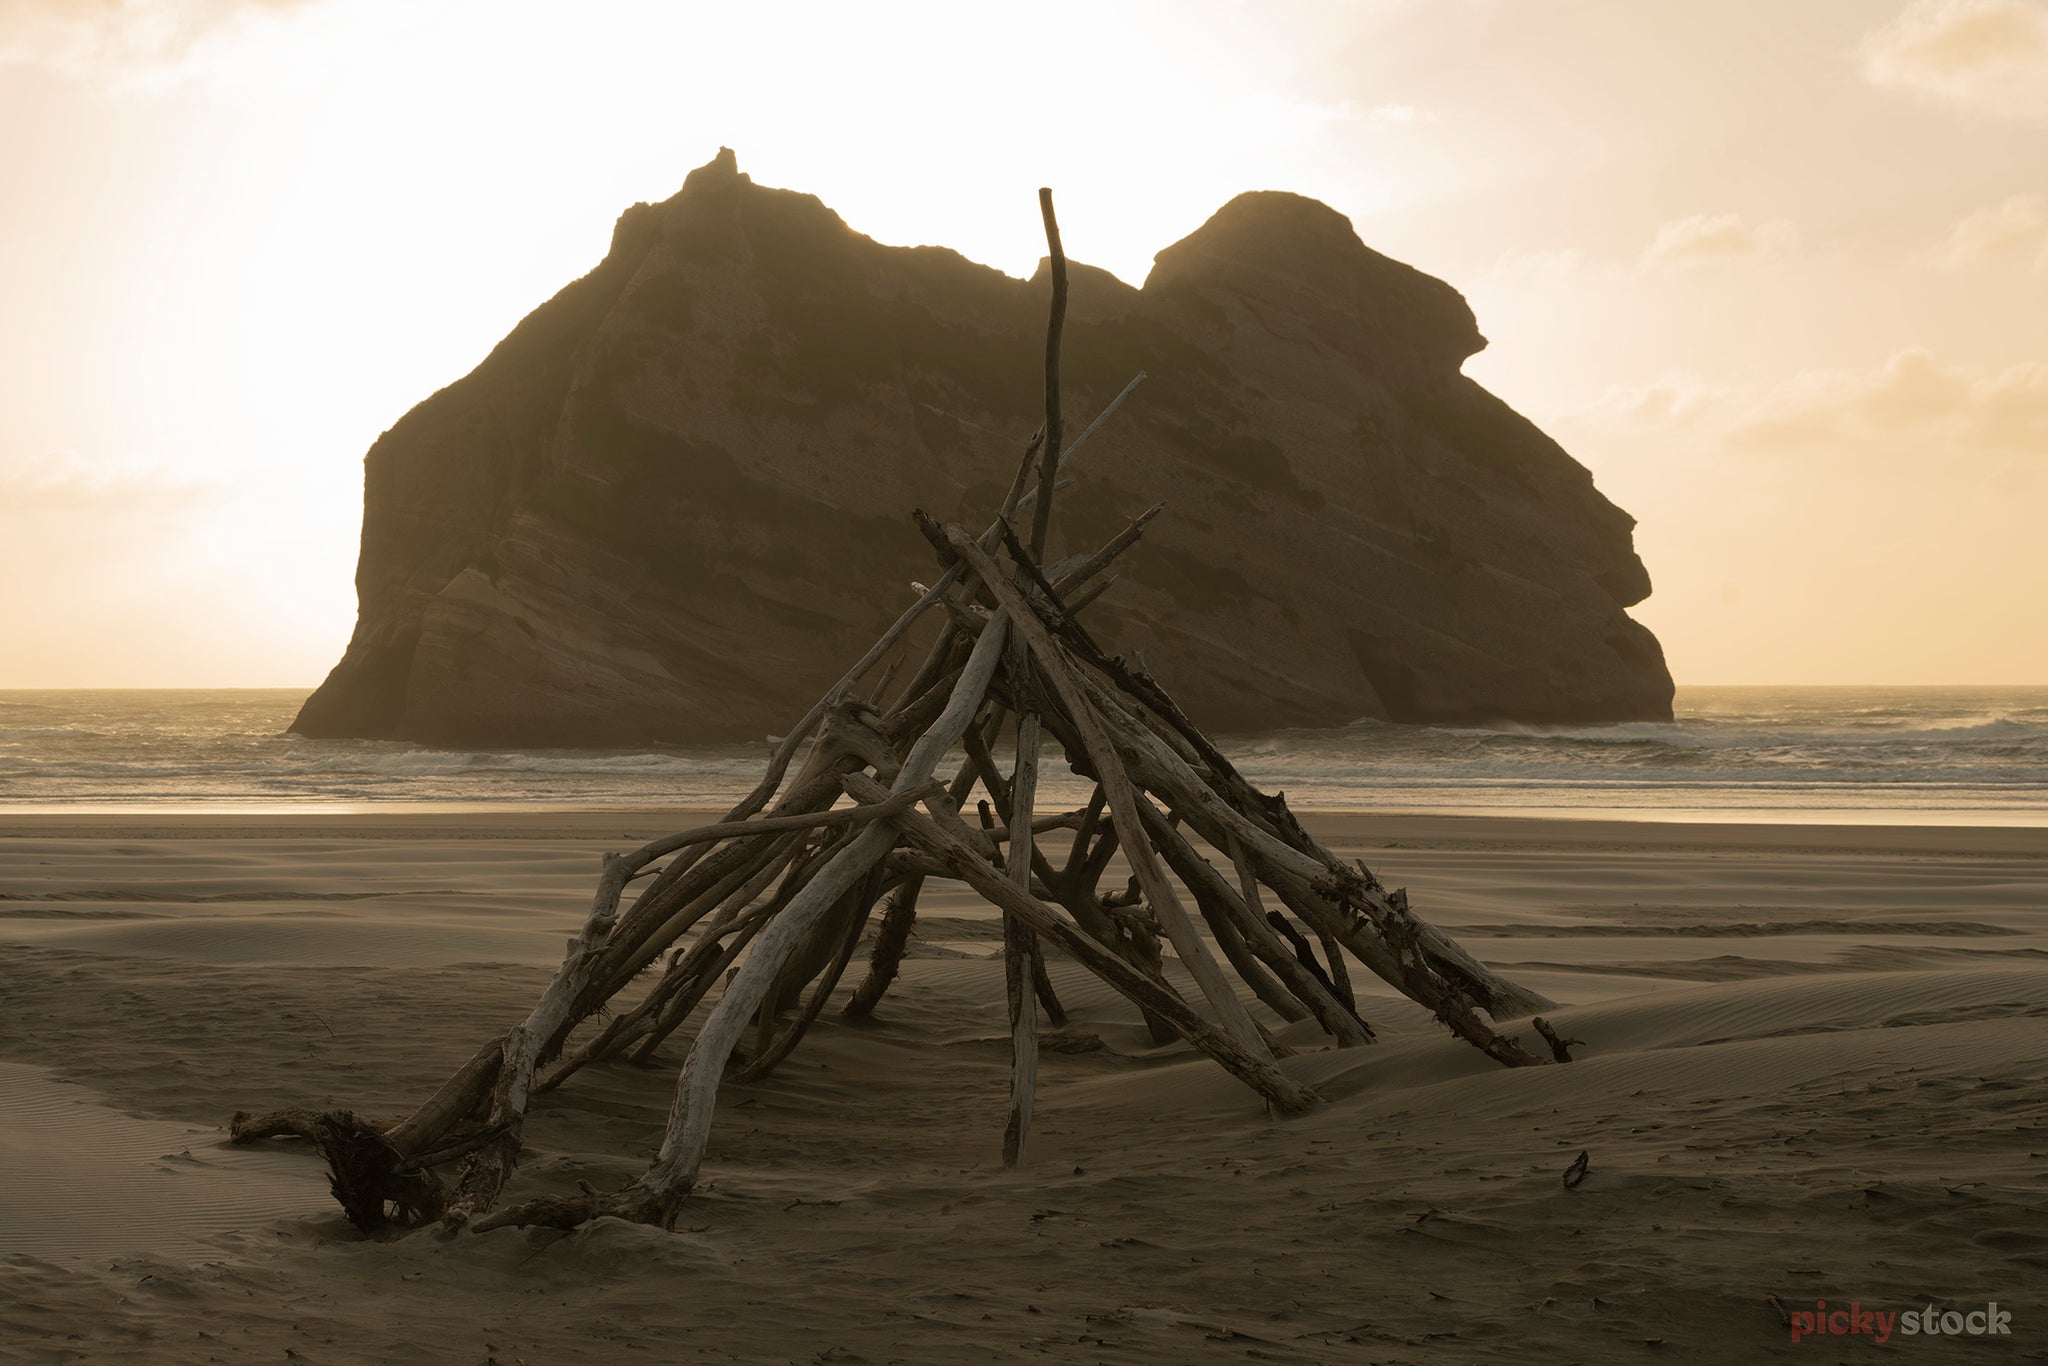 Driftwood structure tipi at Wharariki beach. Golden light on sand beach. Large rock formation in background. 